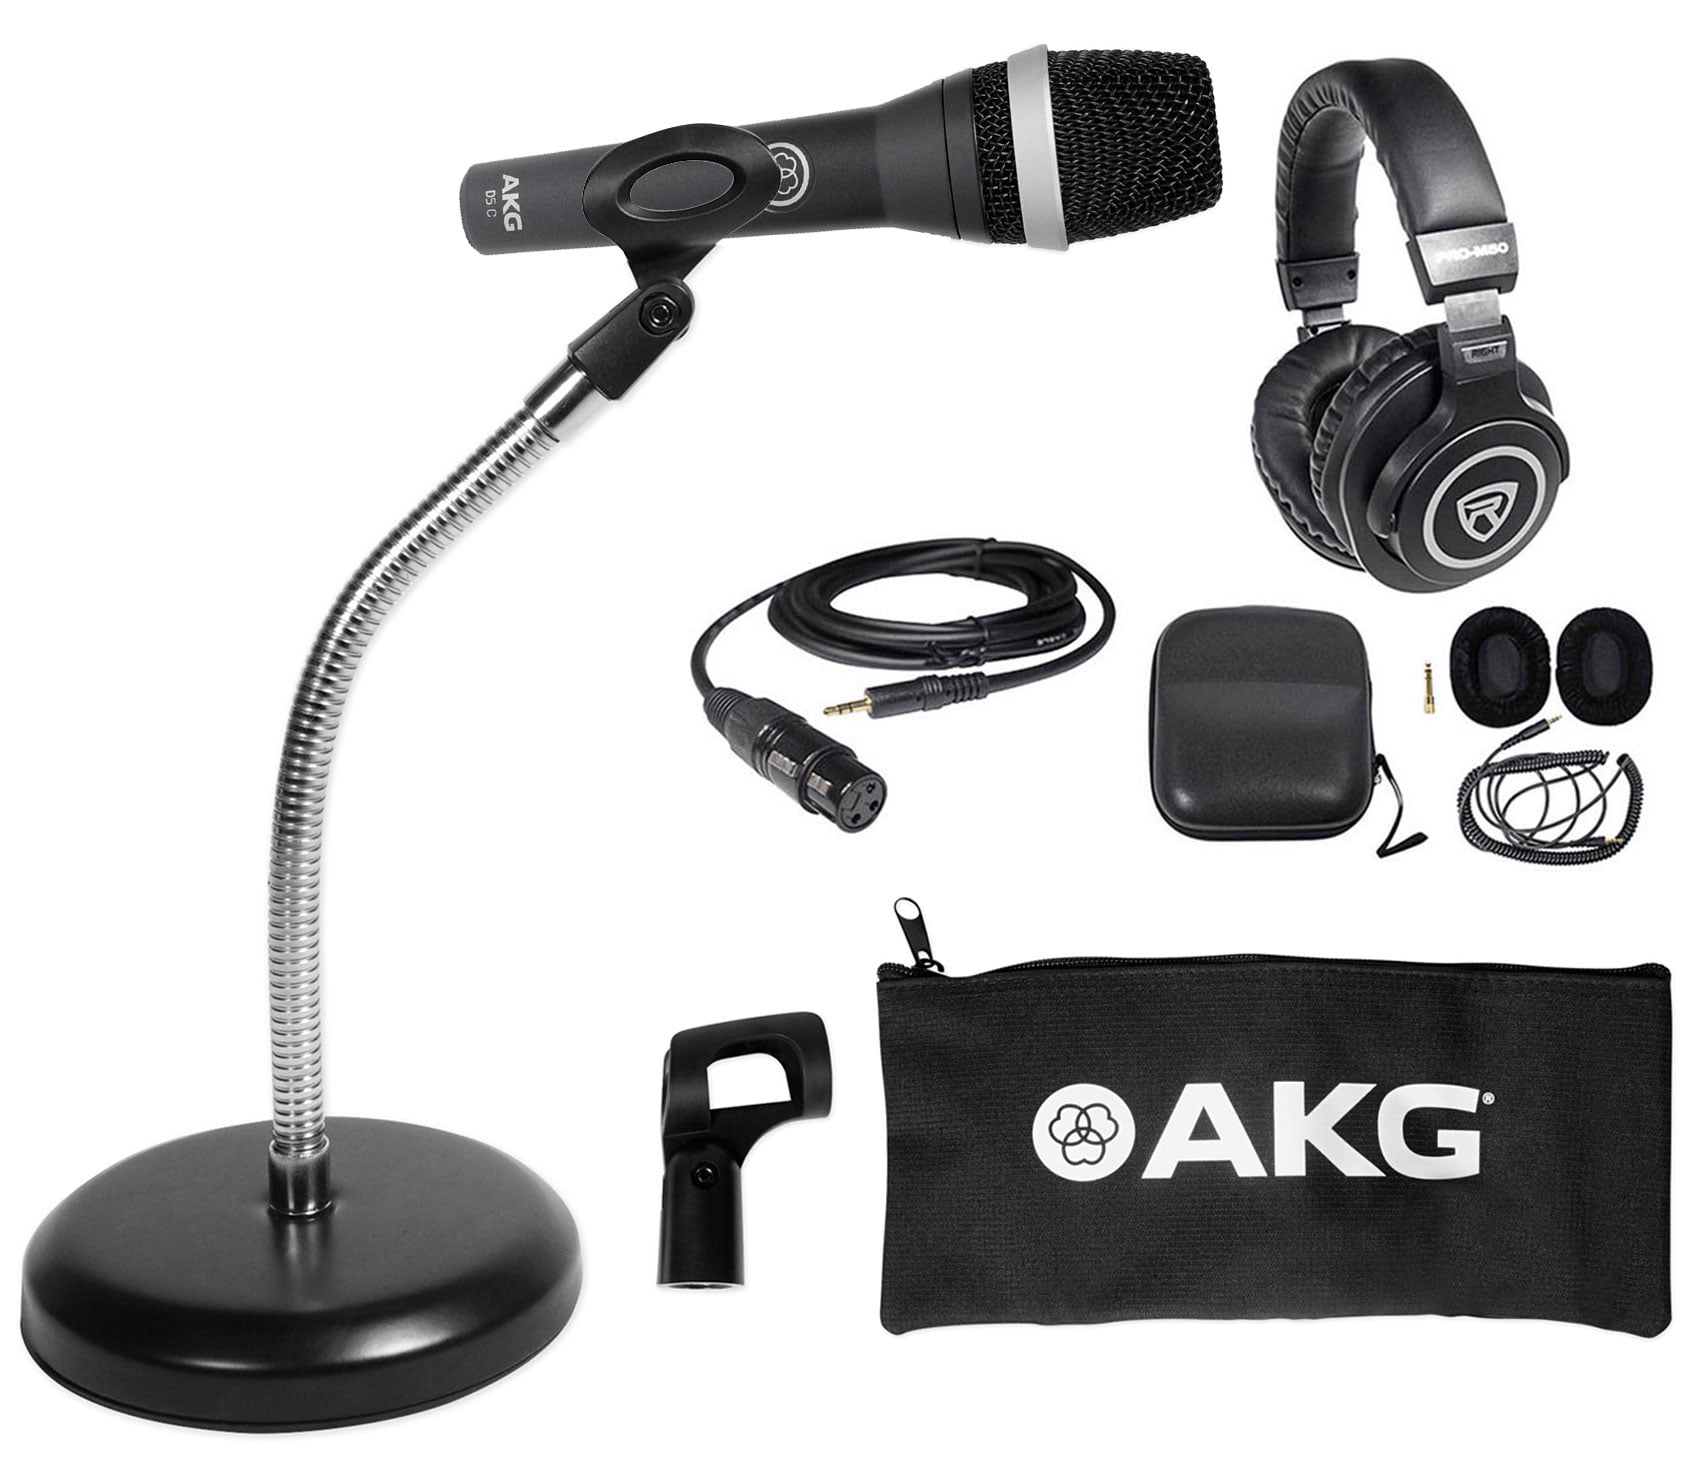 AKG D5 C PC Podcasting Podcast Microphone+Weighted Base Gooseneck+